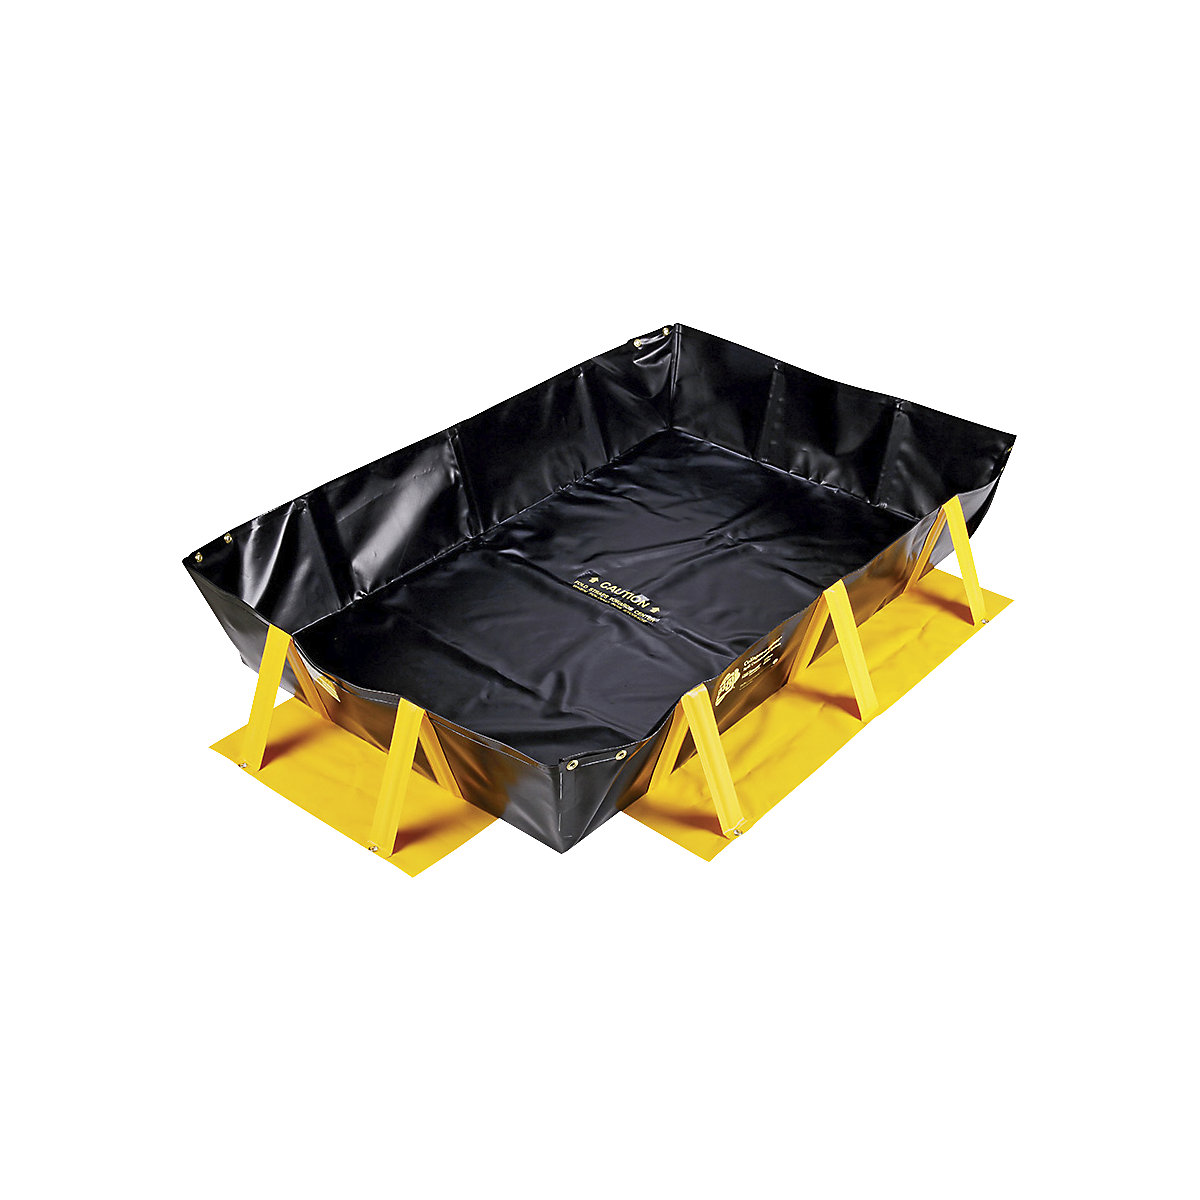 Collapse-A-Tainer® emergency folding tray – PIG, copolymer geomembrane, collection capacity 678 l-2